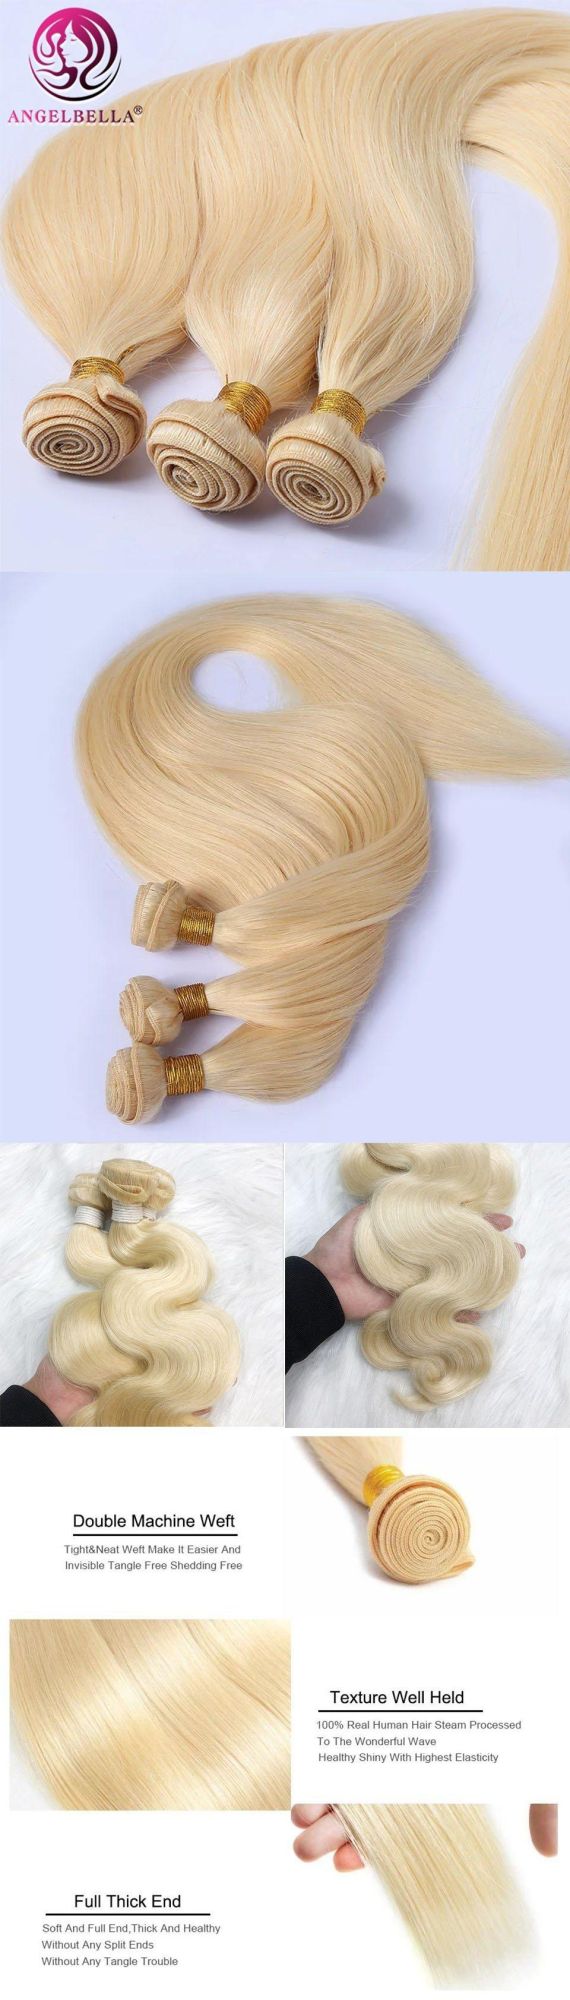 Factory Price Virgin Brazilian 613 Blonde Hair Extension Cuticle Aligned Remy Human Hair Extension Bundles Weave Wefts Vendor